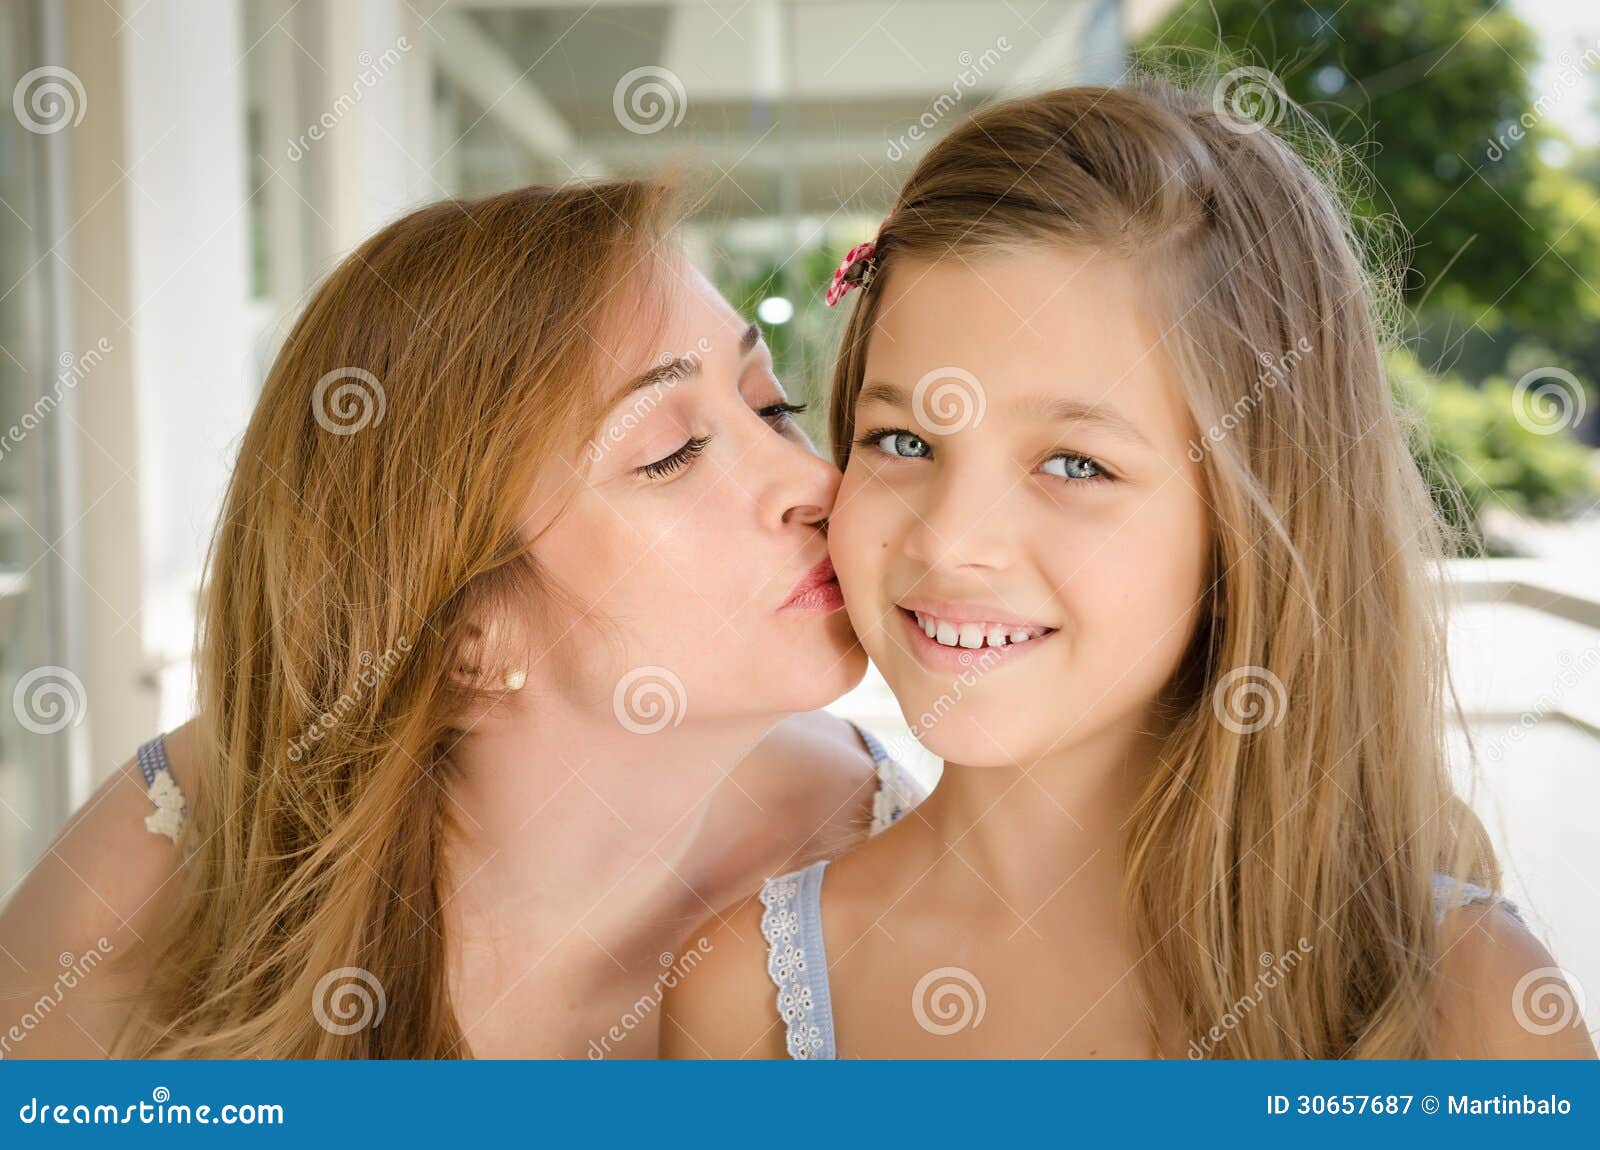 Real Mother Daughter Kissing train creampie